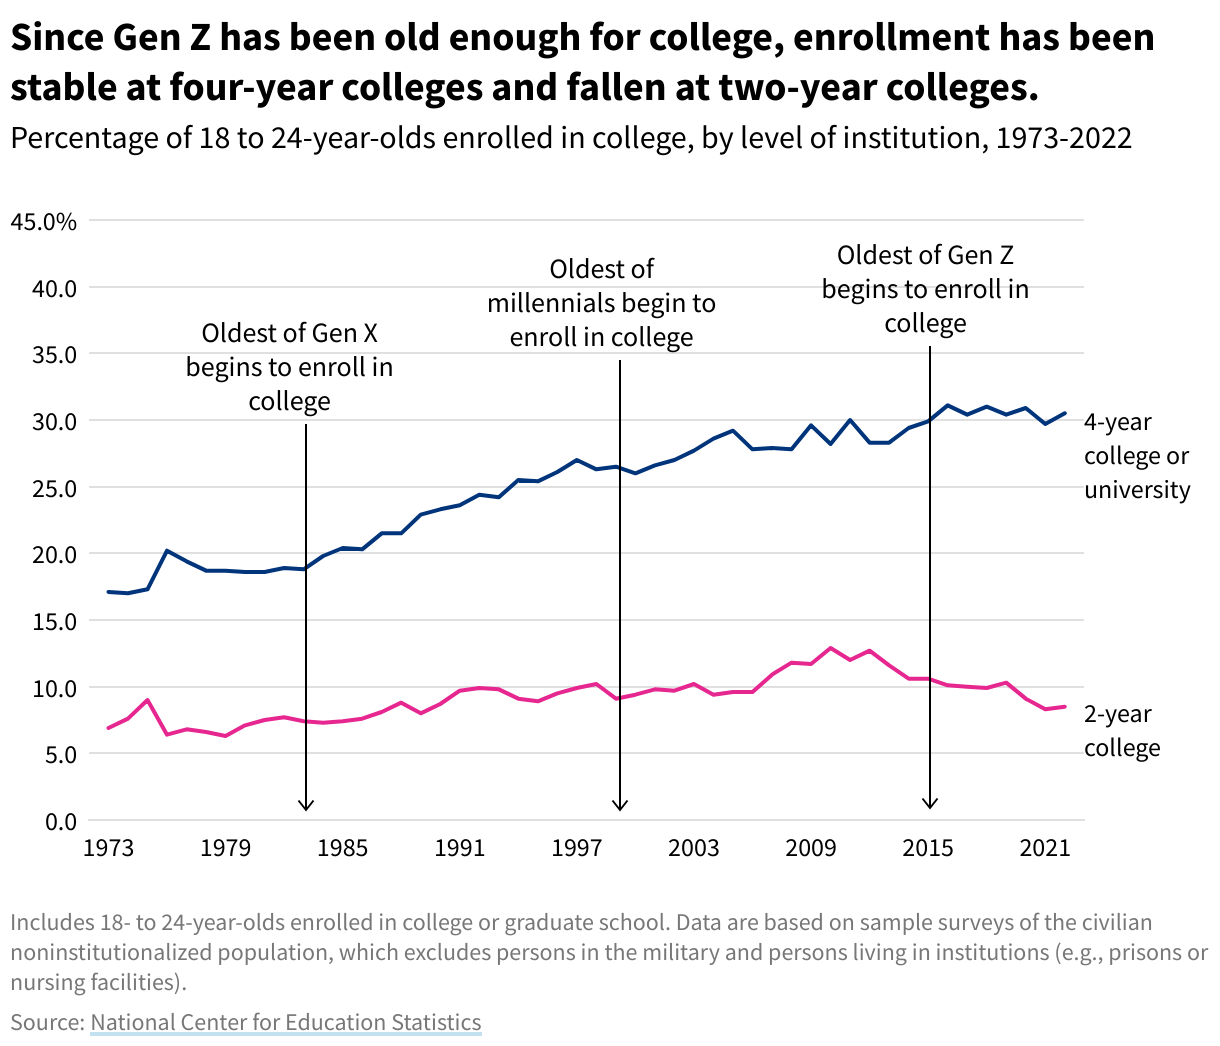 Line chart comparing enrollment rates for 4-year and 2-year colleges from 1973 to 2022